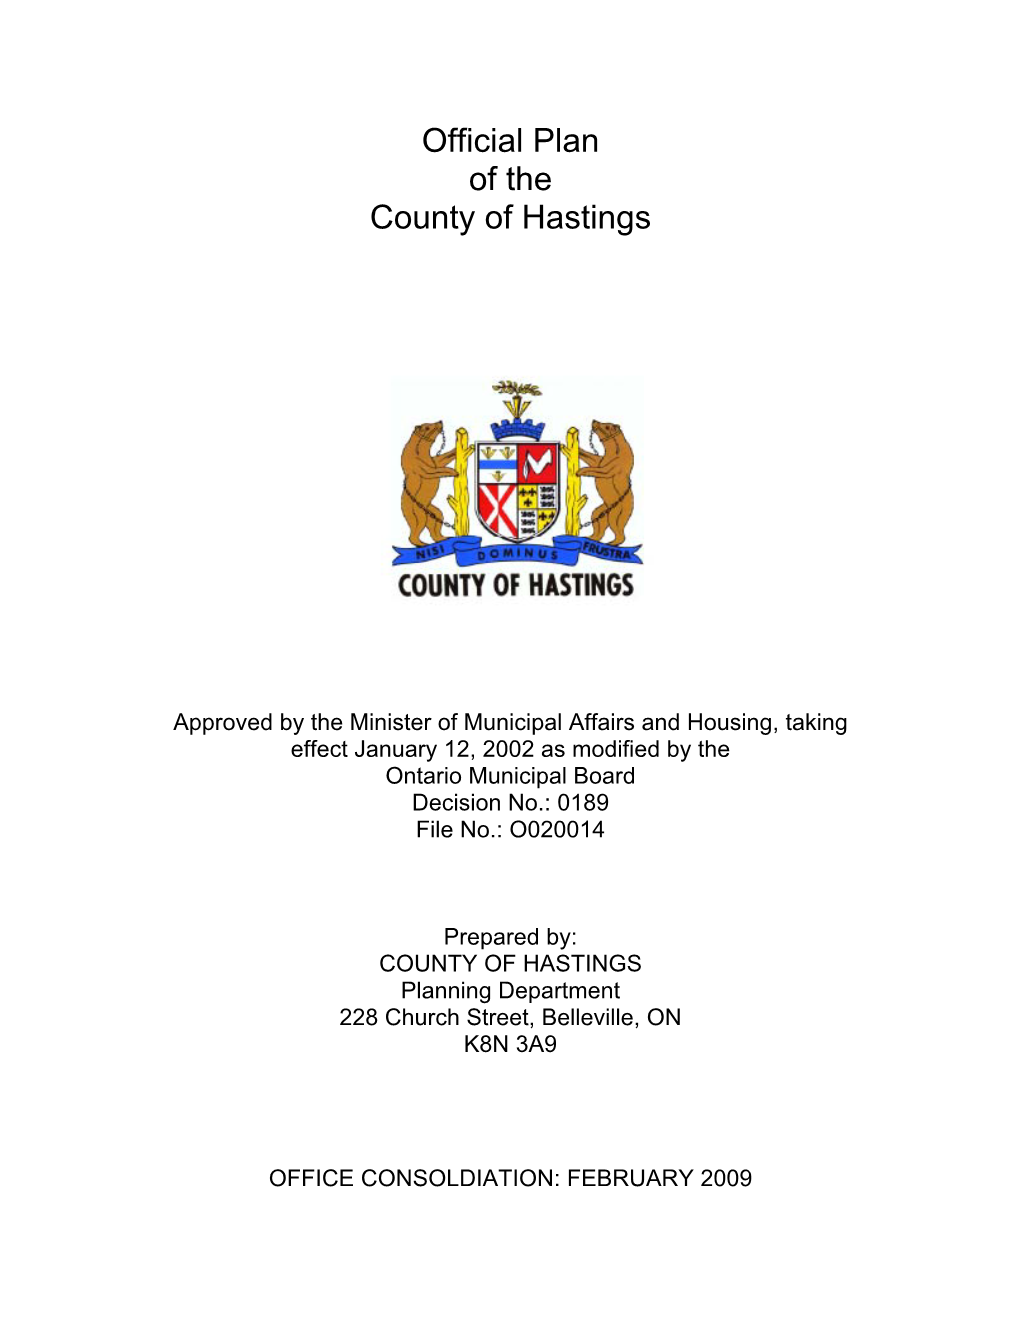 Hastings County Official Plan Includes the Following Municipalities